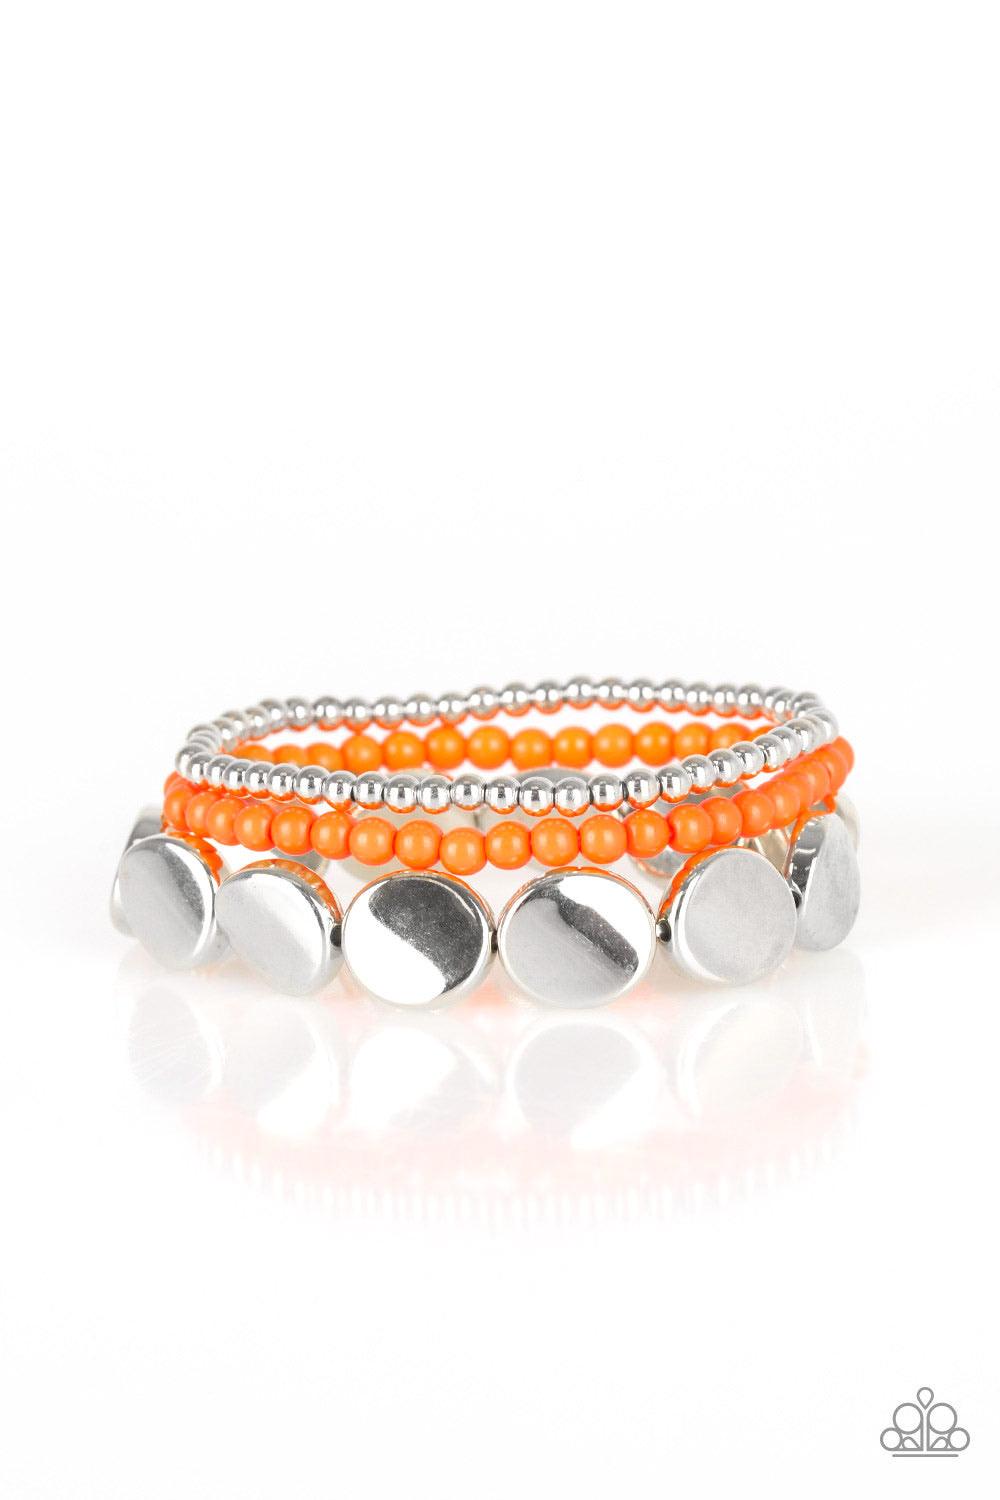 Paparazzi Accessories Beyond Basics - Orange Mismatched silver and orange beads and round silver accents are threaded along stretchy bands, creating colorful layers around the wrist. Sold as one set of three bracelets. Jewelry